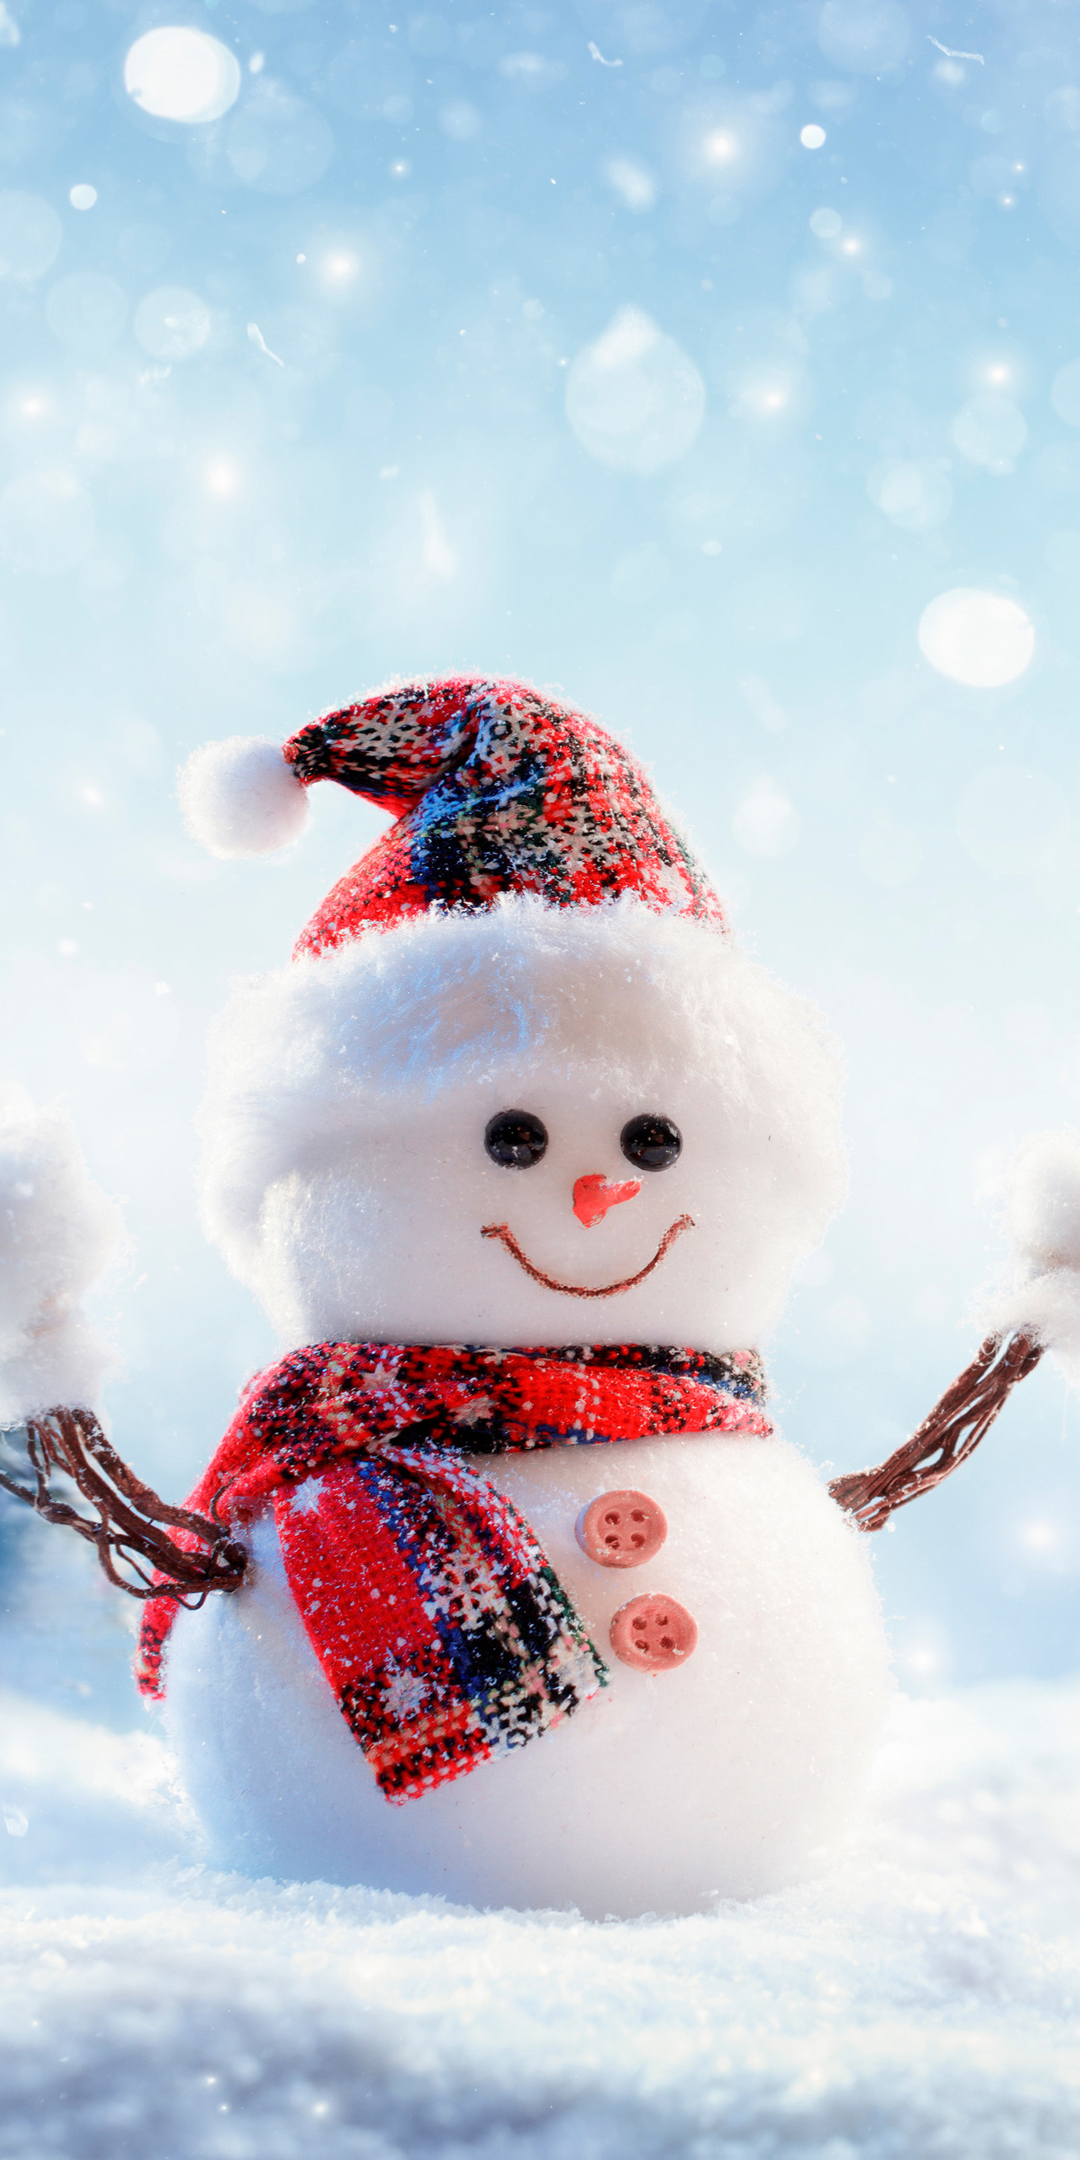 pics of wallpapers for phones,snowman,snow,winter